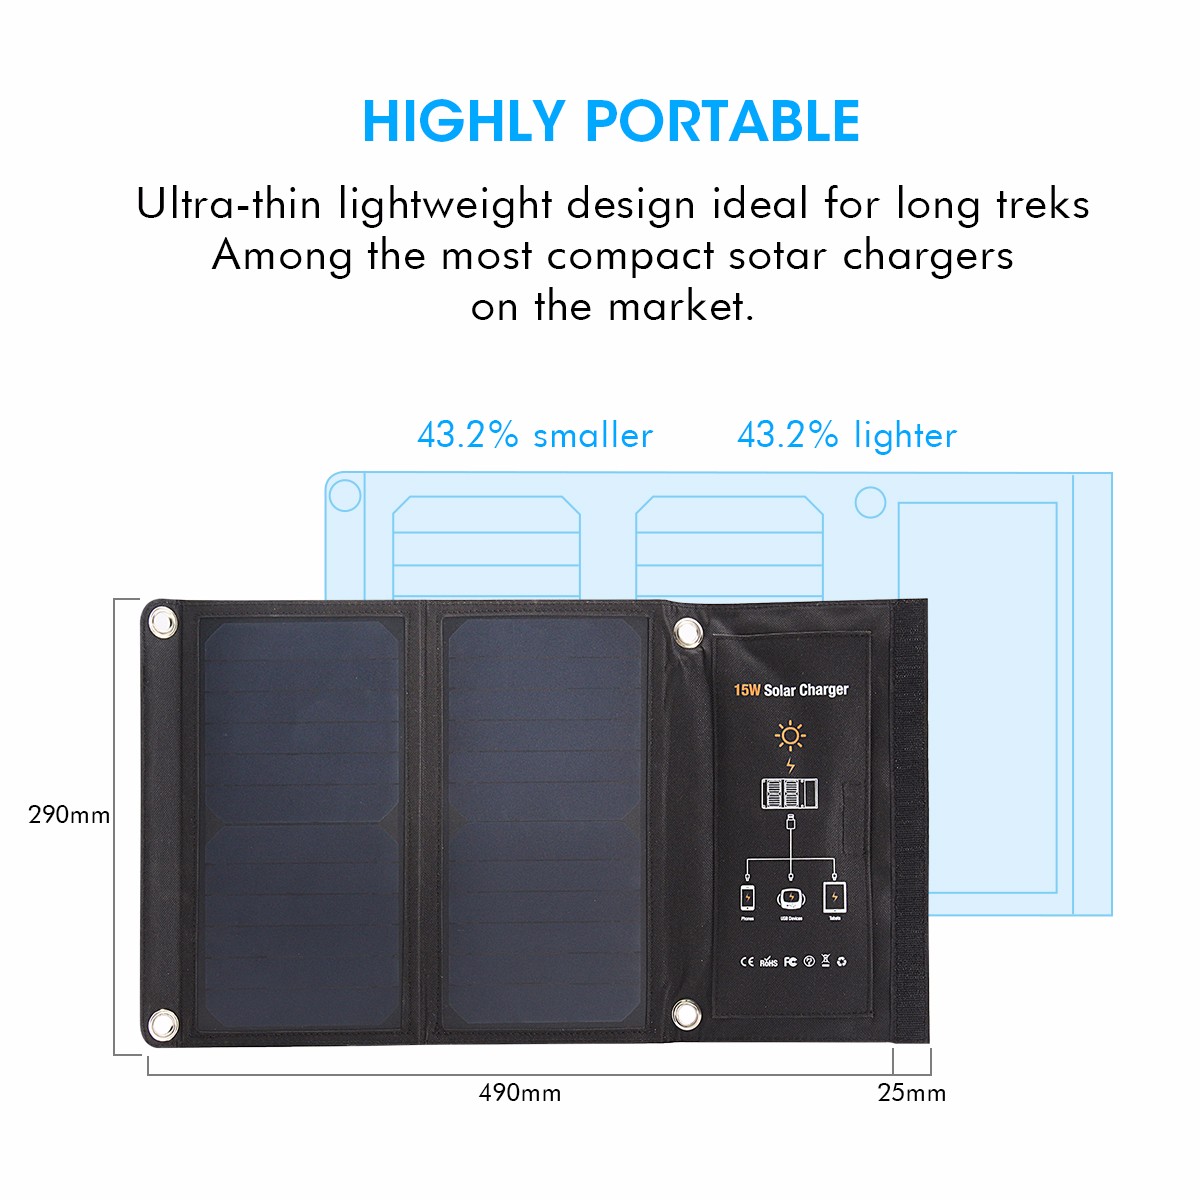 MOHOO 15w 2.5A 2 Port Solar Charger SLS-15 Comes with 2 Carabiner + Multifunctional Charging Cable